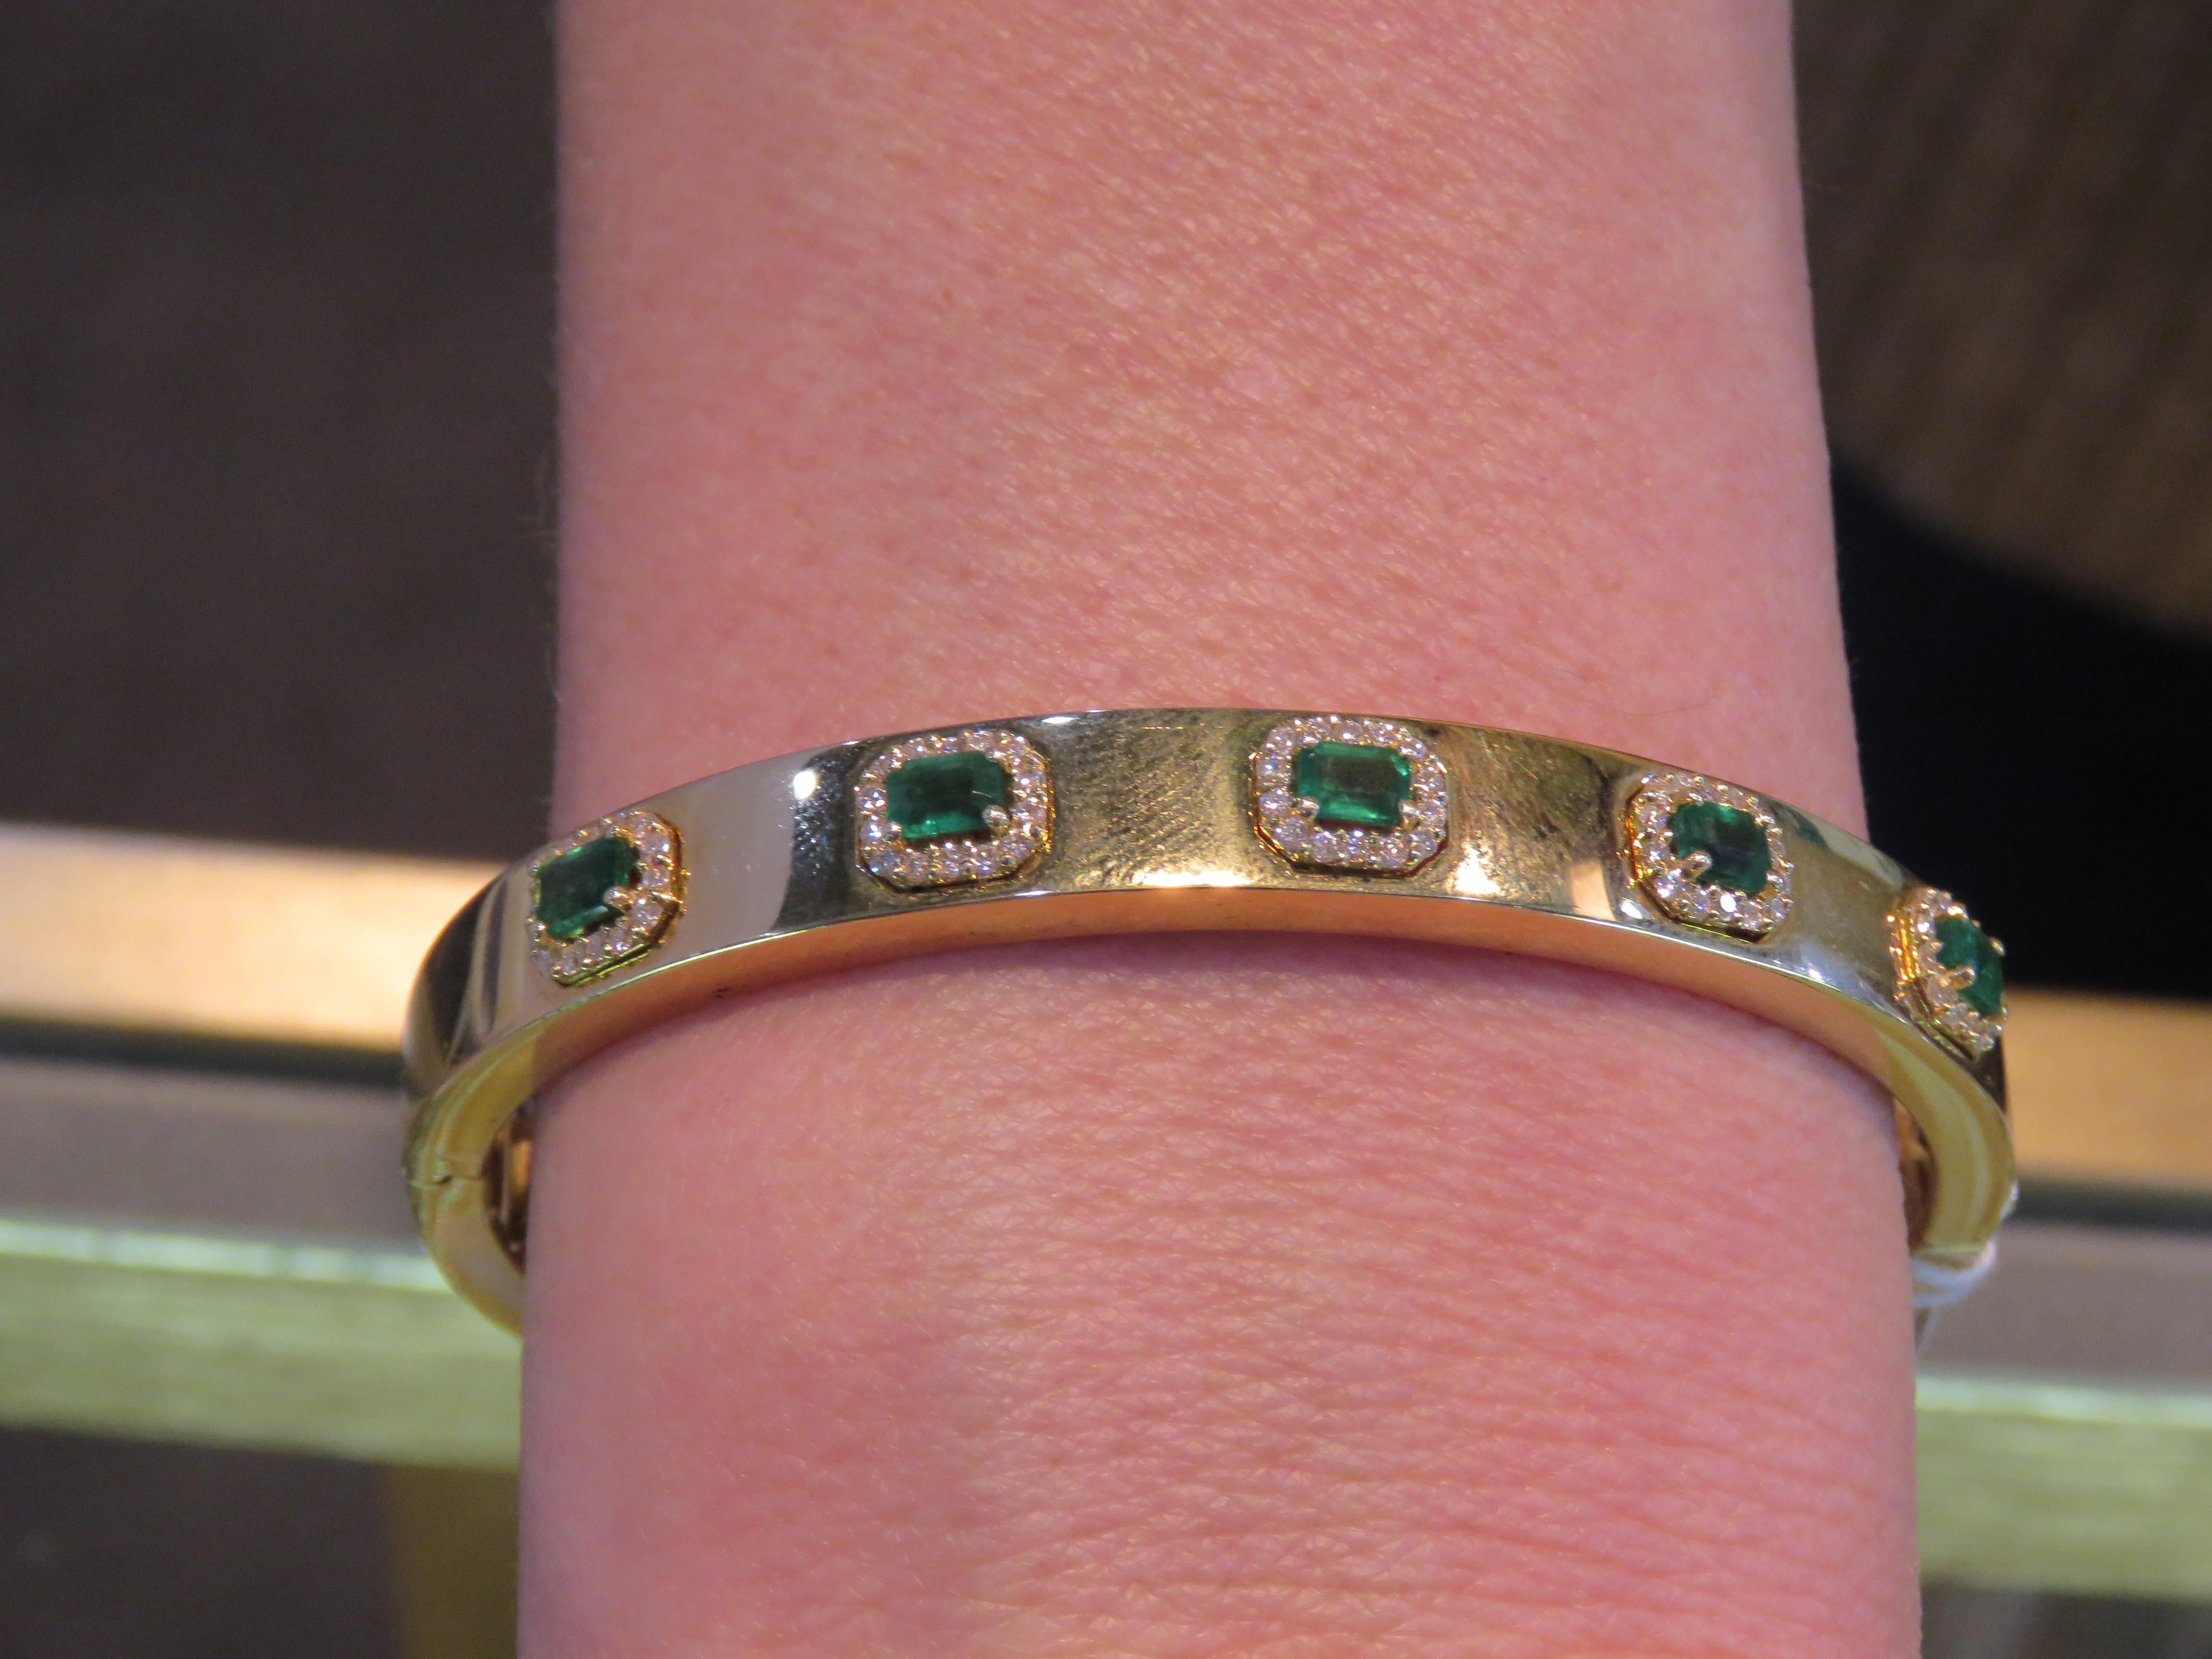 The Following Item we are offering is a Rare Magnificent Radiant 18KT Gold Large Rare Gorgeous Fancy Emerald and Diamond Bangle Bracelet. Bracelet is comprised of Beautiful Glittering Emeralds surrounded with Gorgeous Diamonds!!! T.C.W. Approx